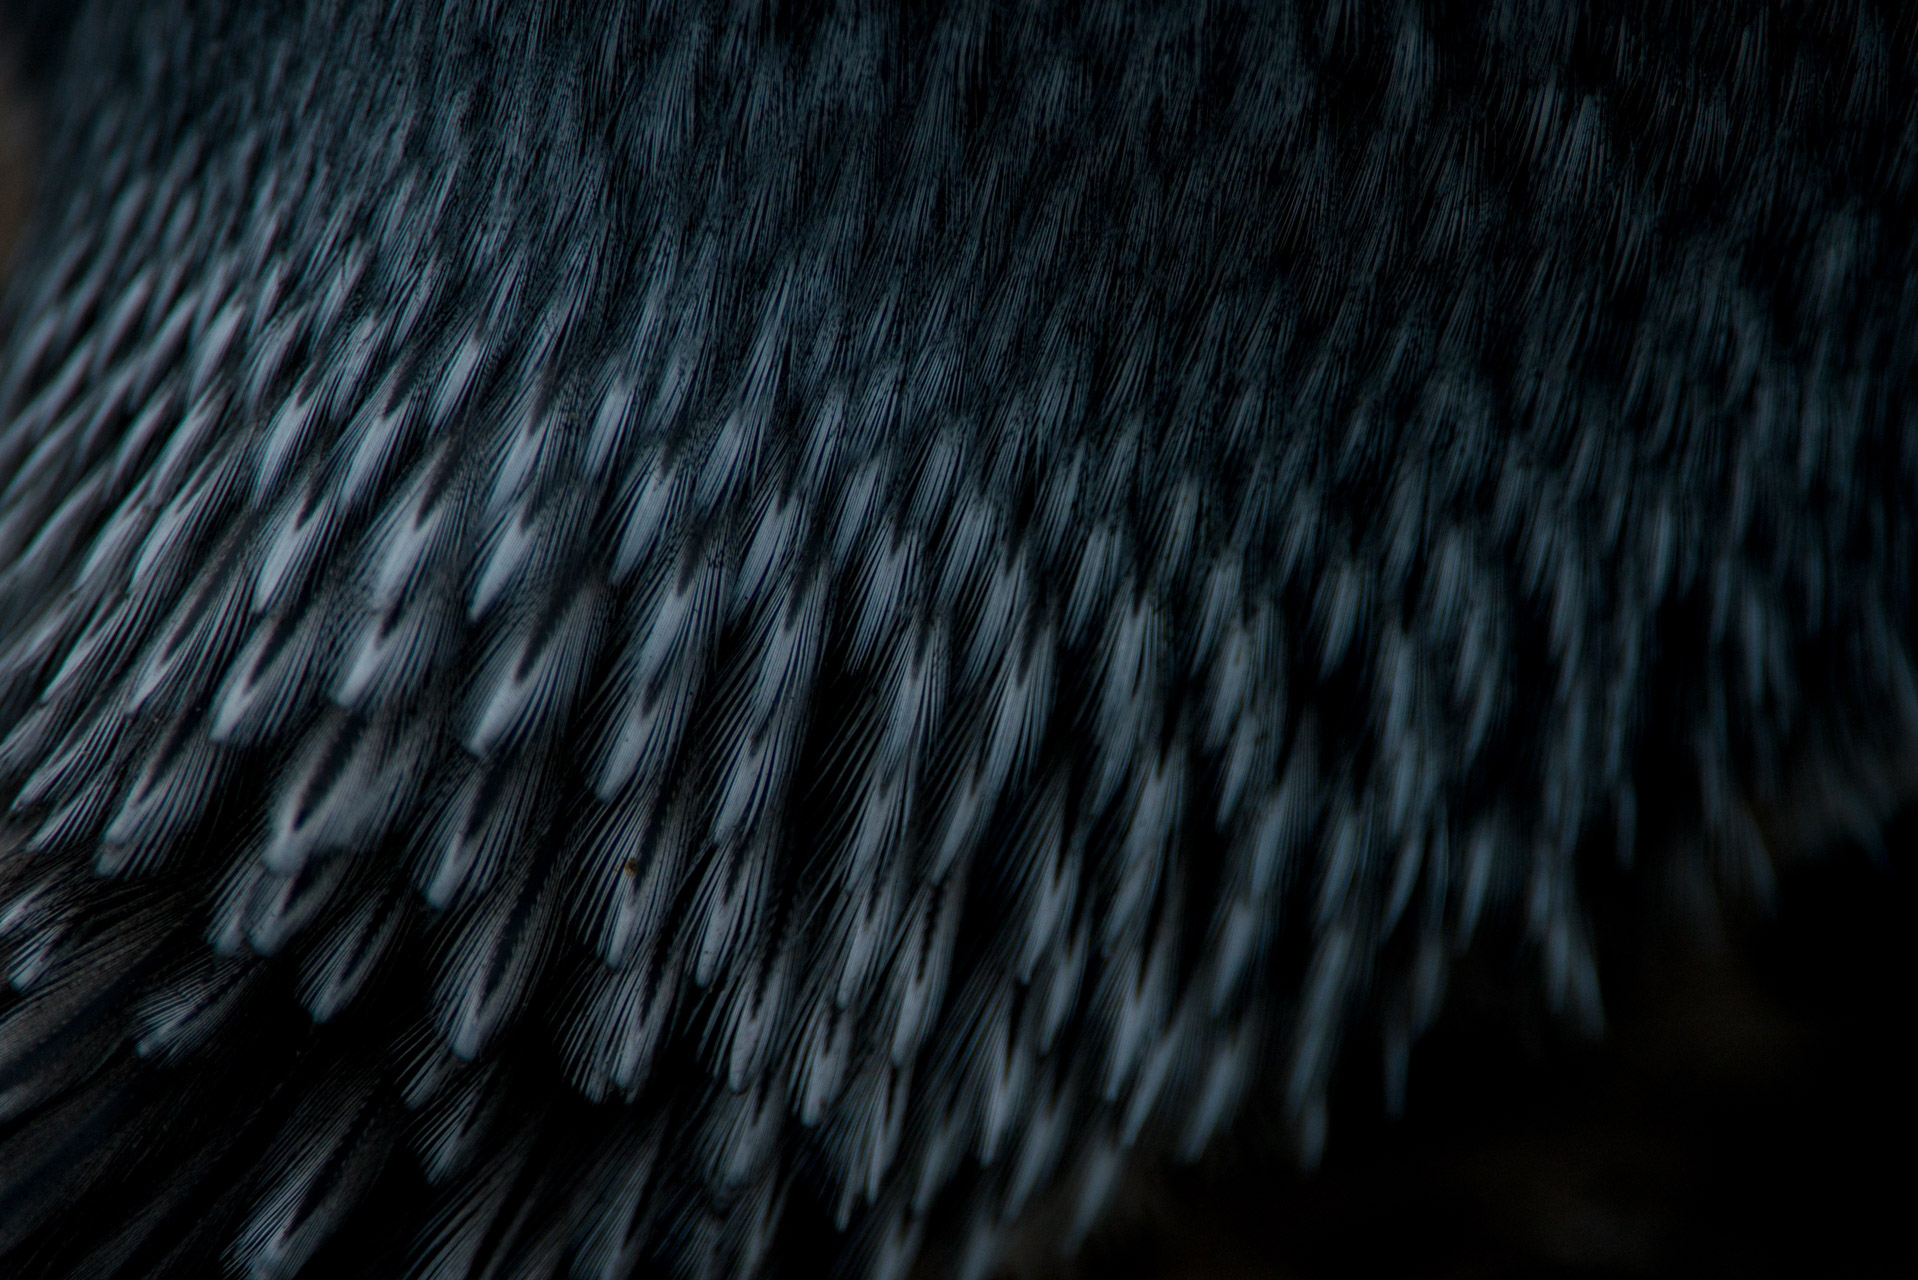 Abstract pattern of King Penguin, Aptenodytes patagonicus, tail feathers.